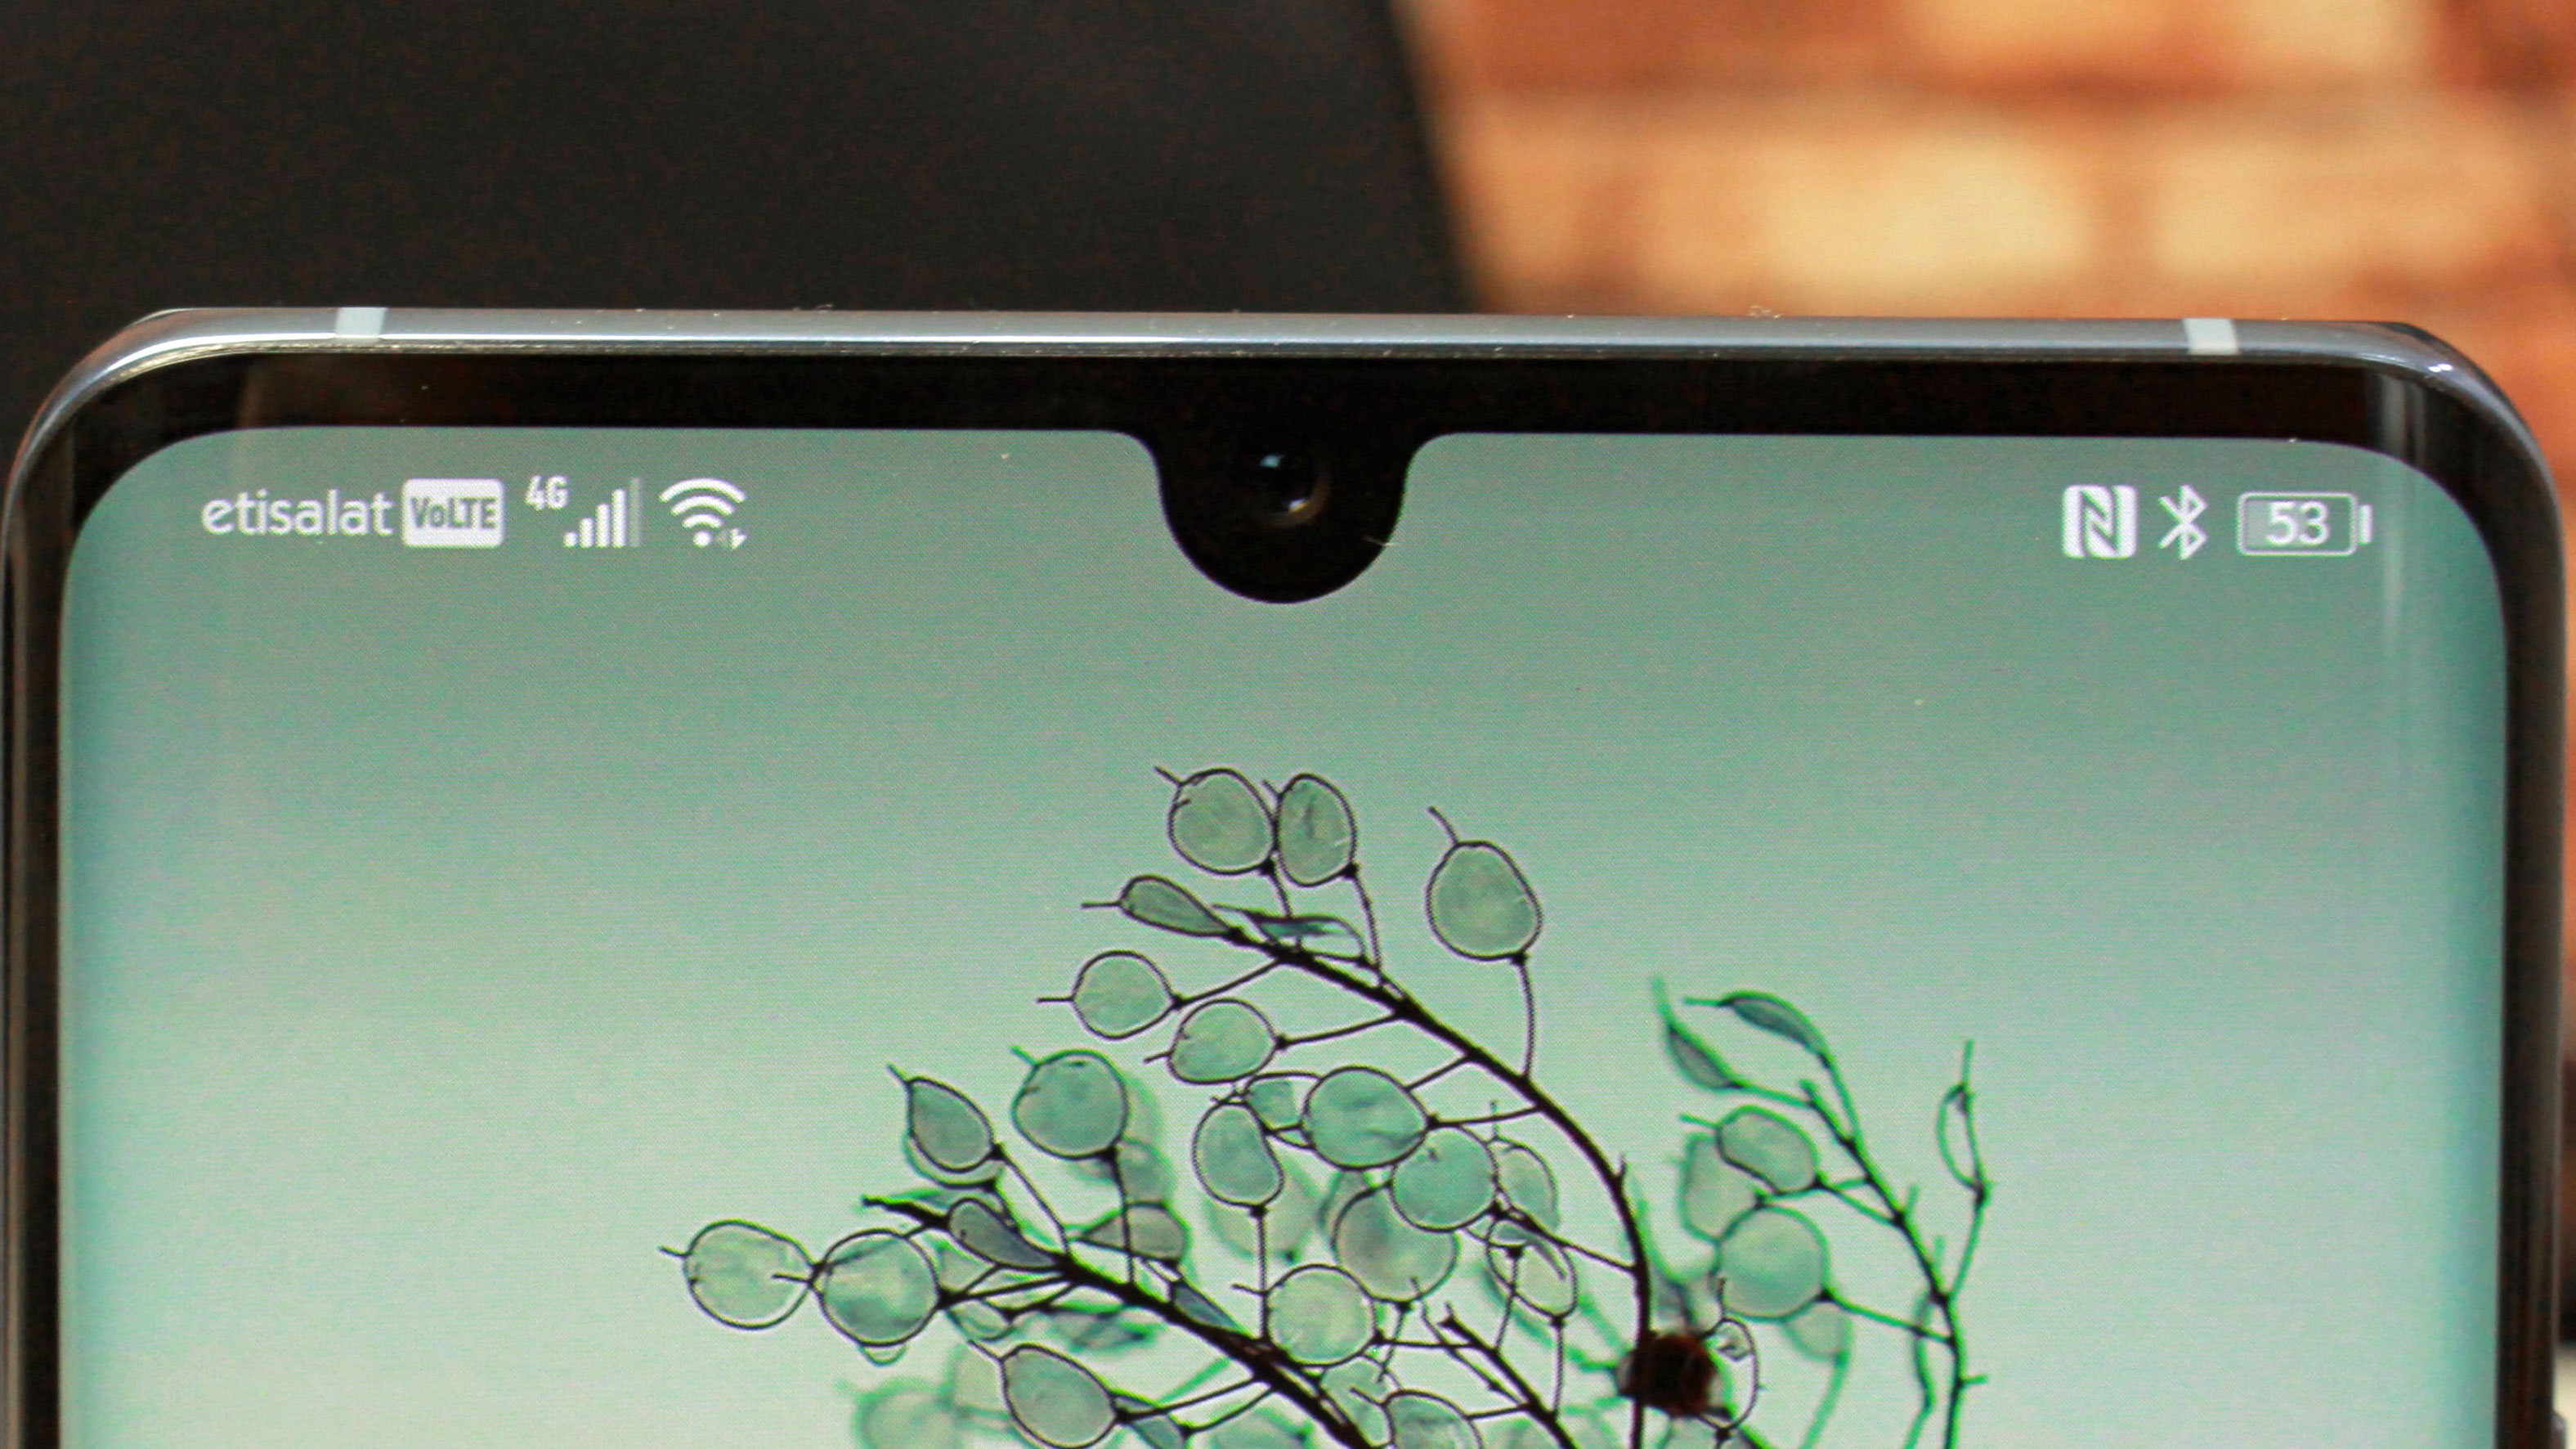 Huawei P40 Pro might have a huge front camera cut-out according to leaked image